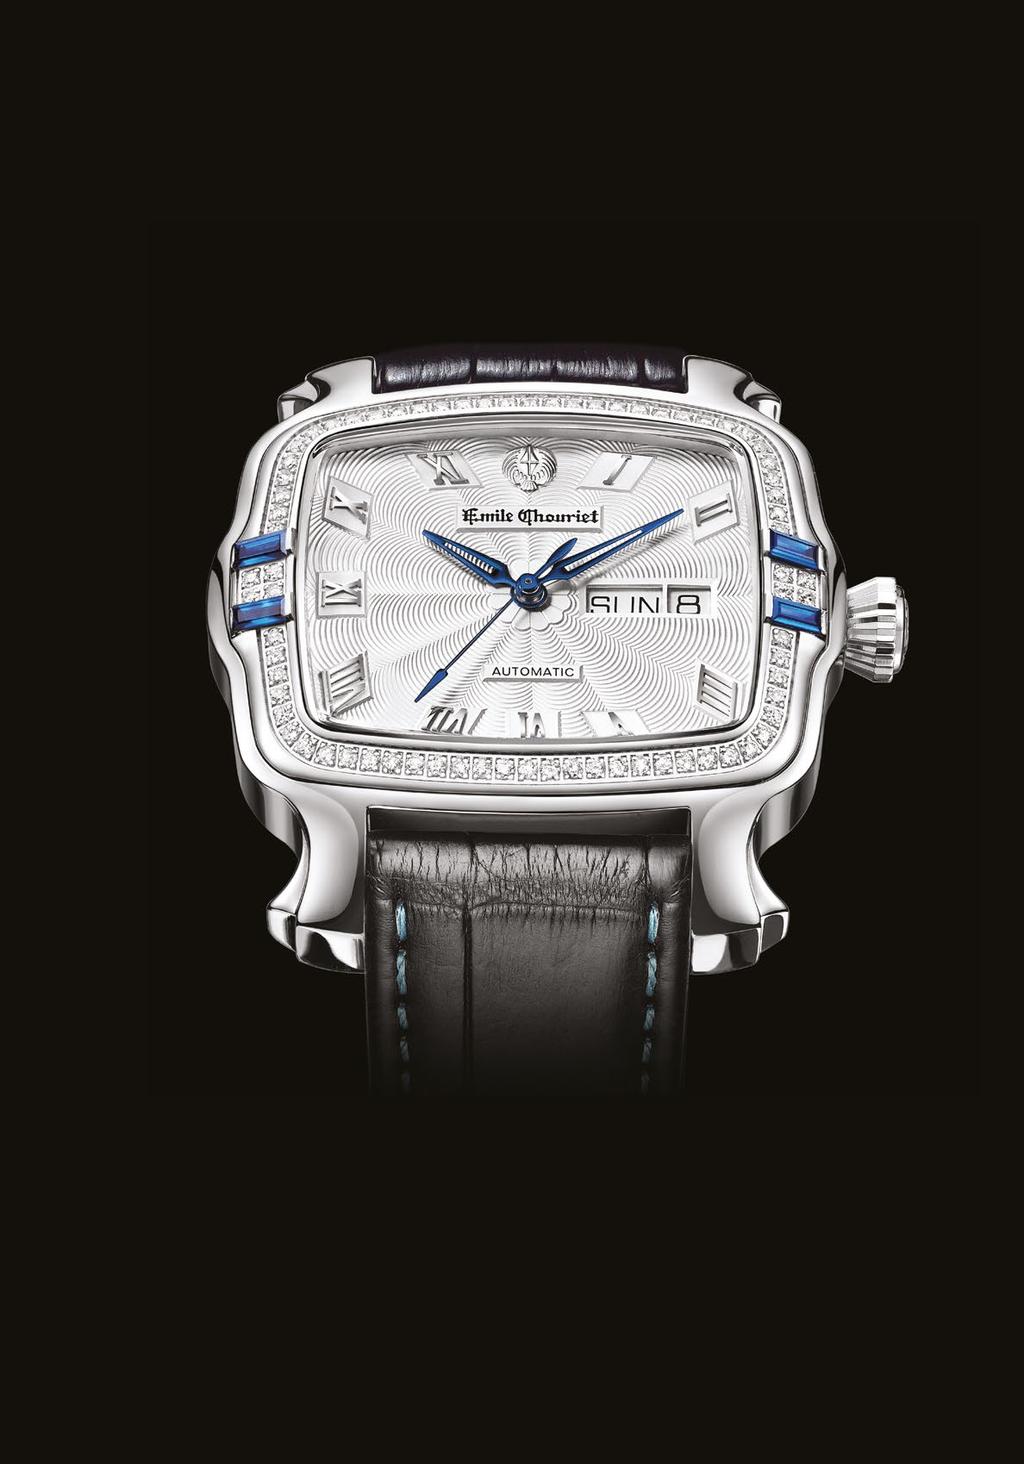 109 TRADITION COLLECTIONS 110 PEARL THE SWISS ART OF WATCHMAKING TO WIN OVER THE HEART OF THE EMPERORS OF THE ORIENT Emile Chouriet chose to commemorate the first commercial relations between Swiss